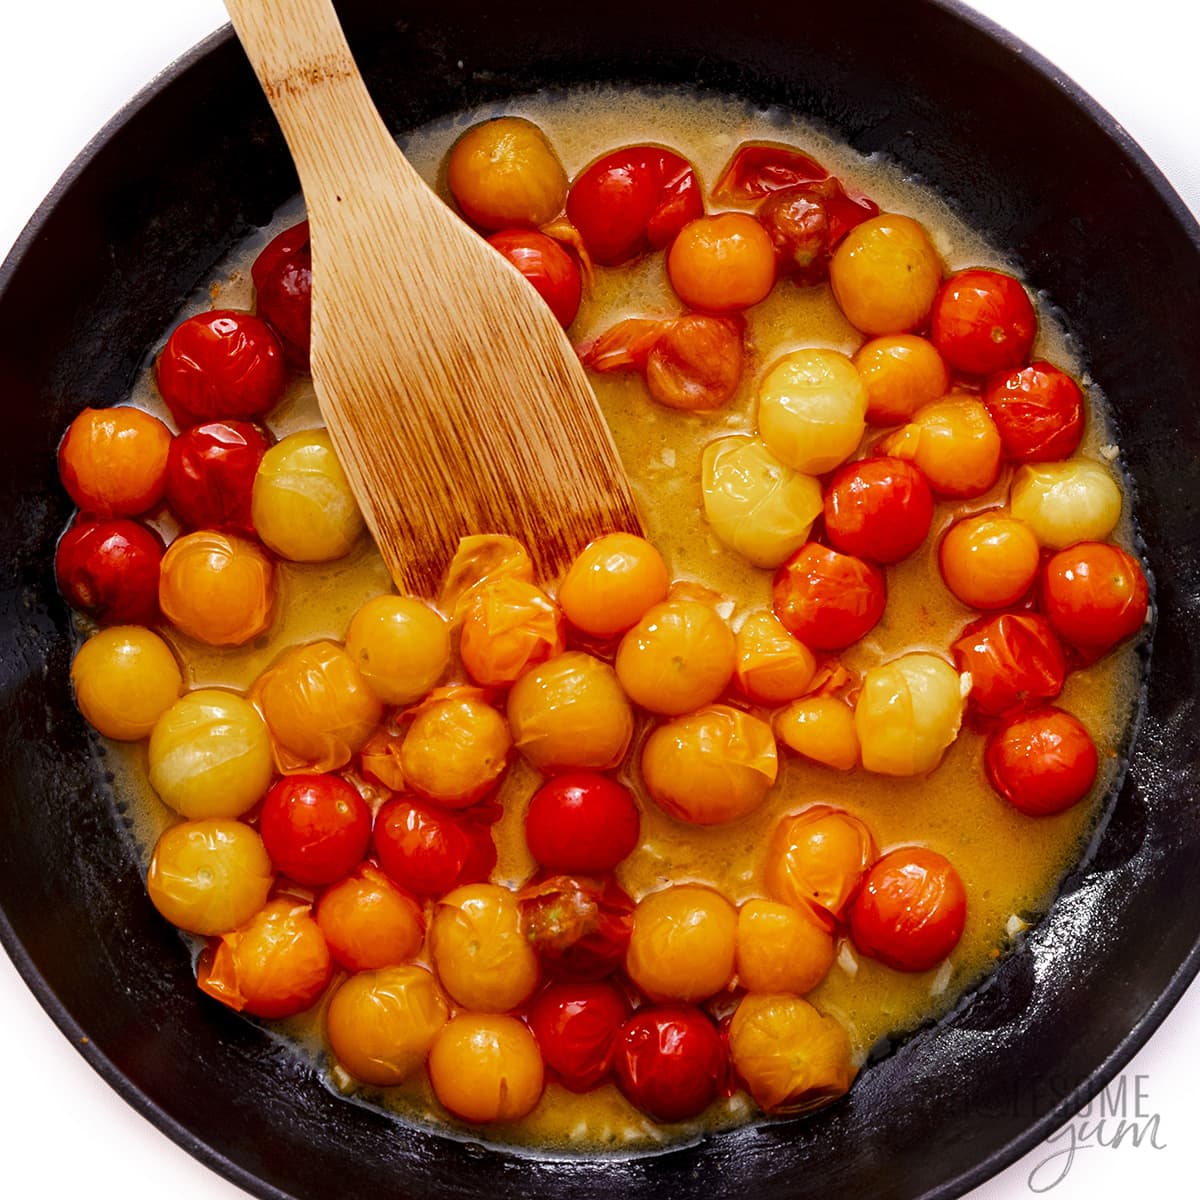 Tomato and wine sauce in a skillet.